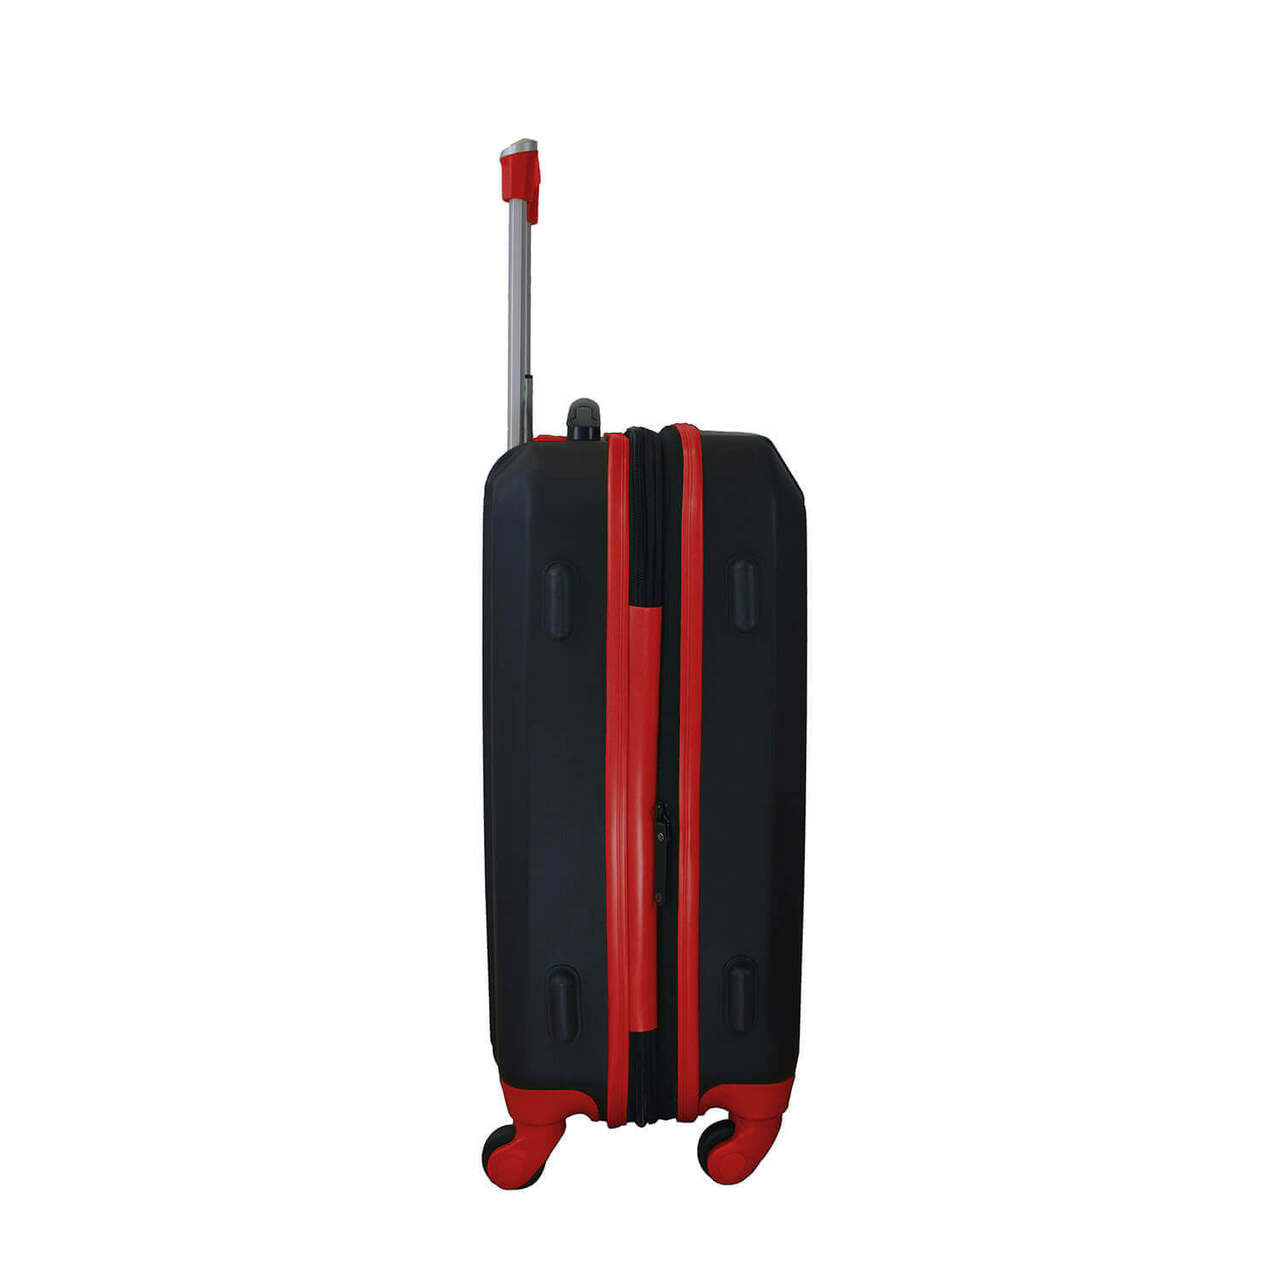 Northeastern Carry On Spinner Luggage | Northeastern Hardcase Two-Tone Luggage Carry-on Spinner in Red